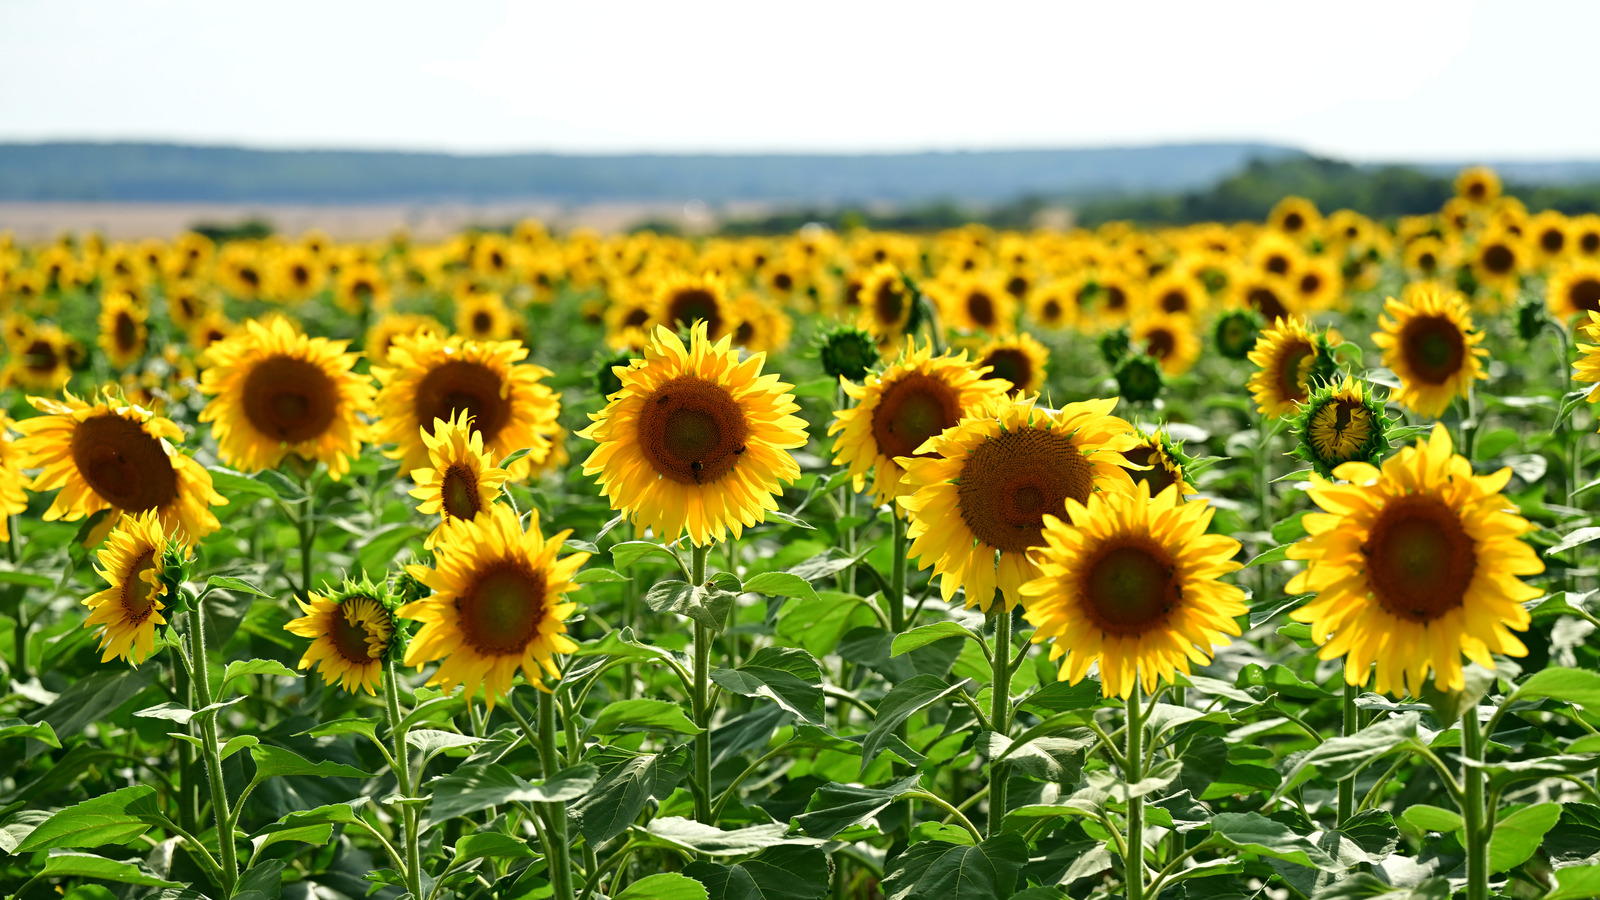 16 Sunflower Species Every Gardening Enthusiast Should Know About